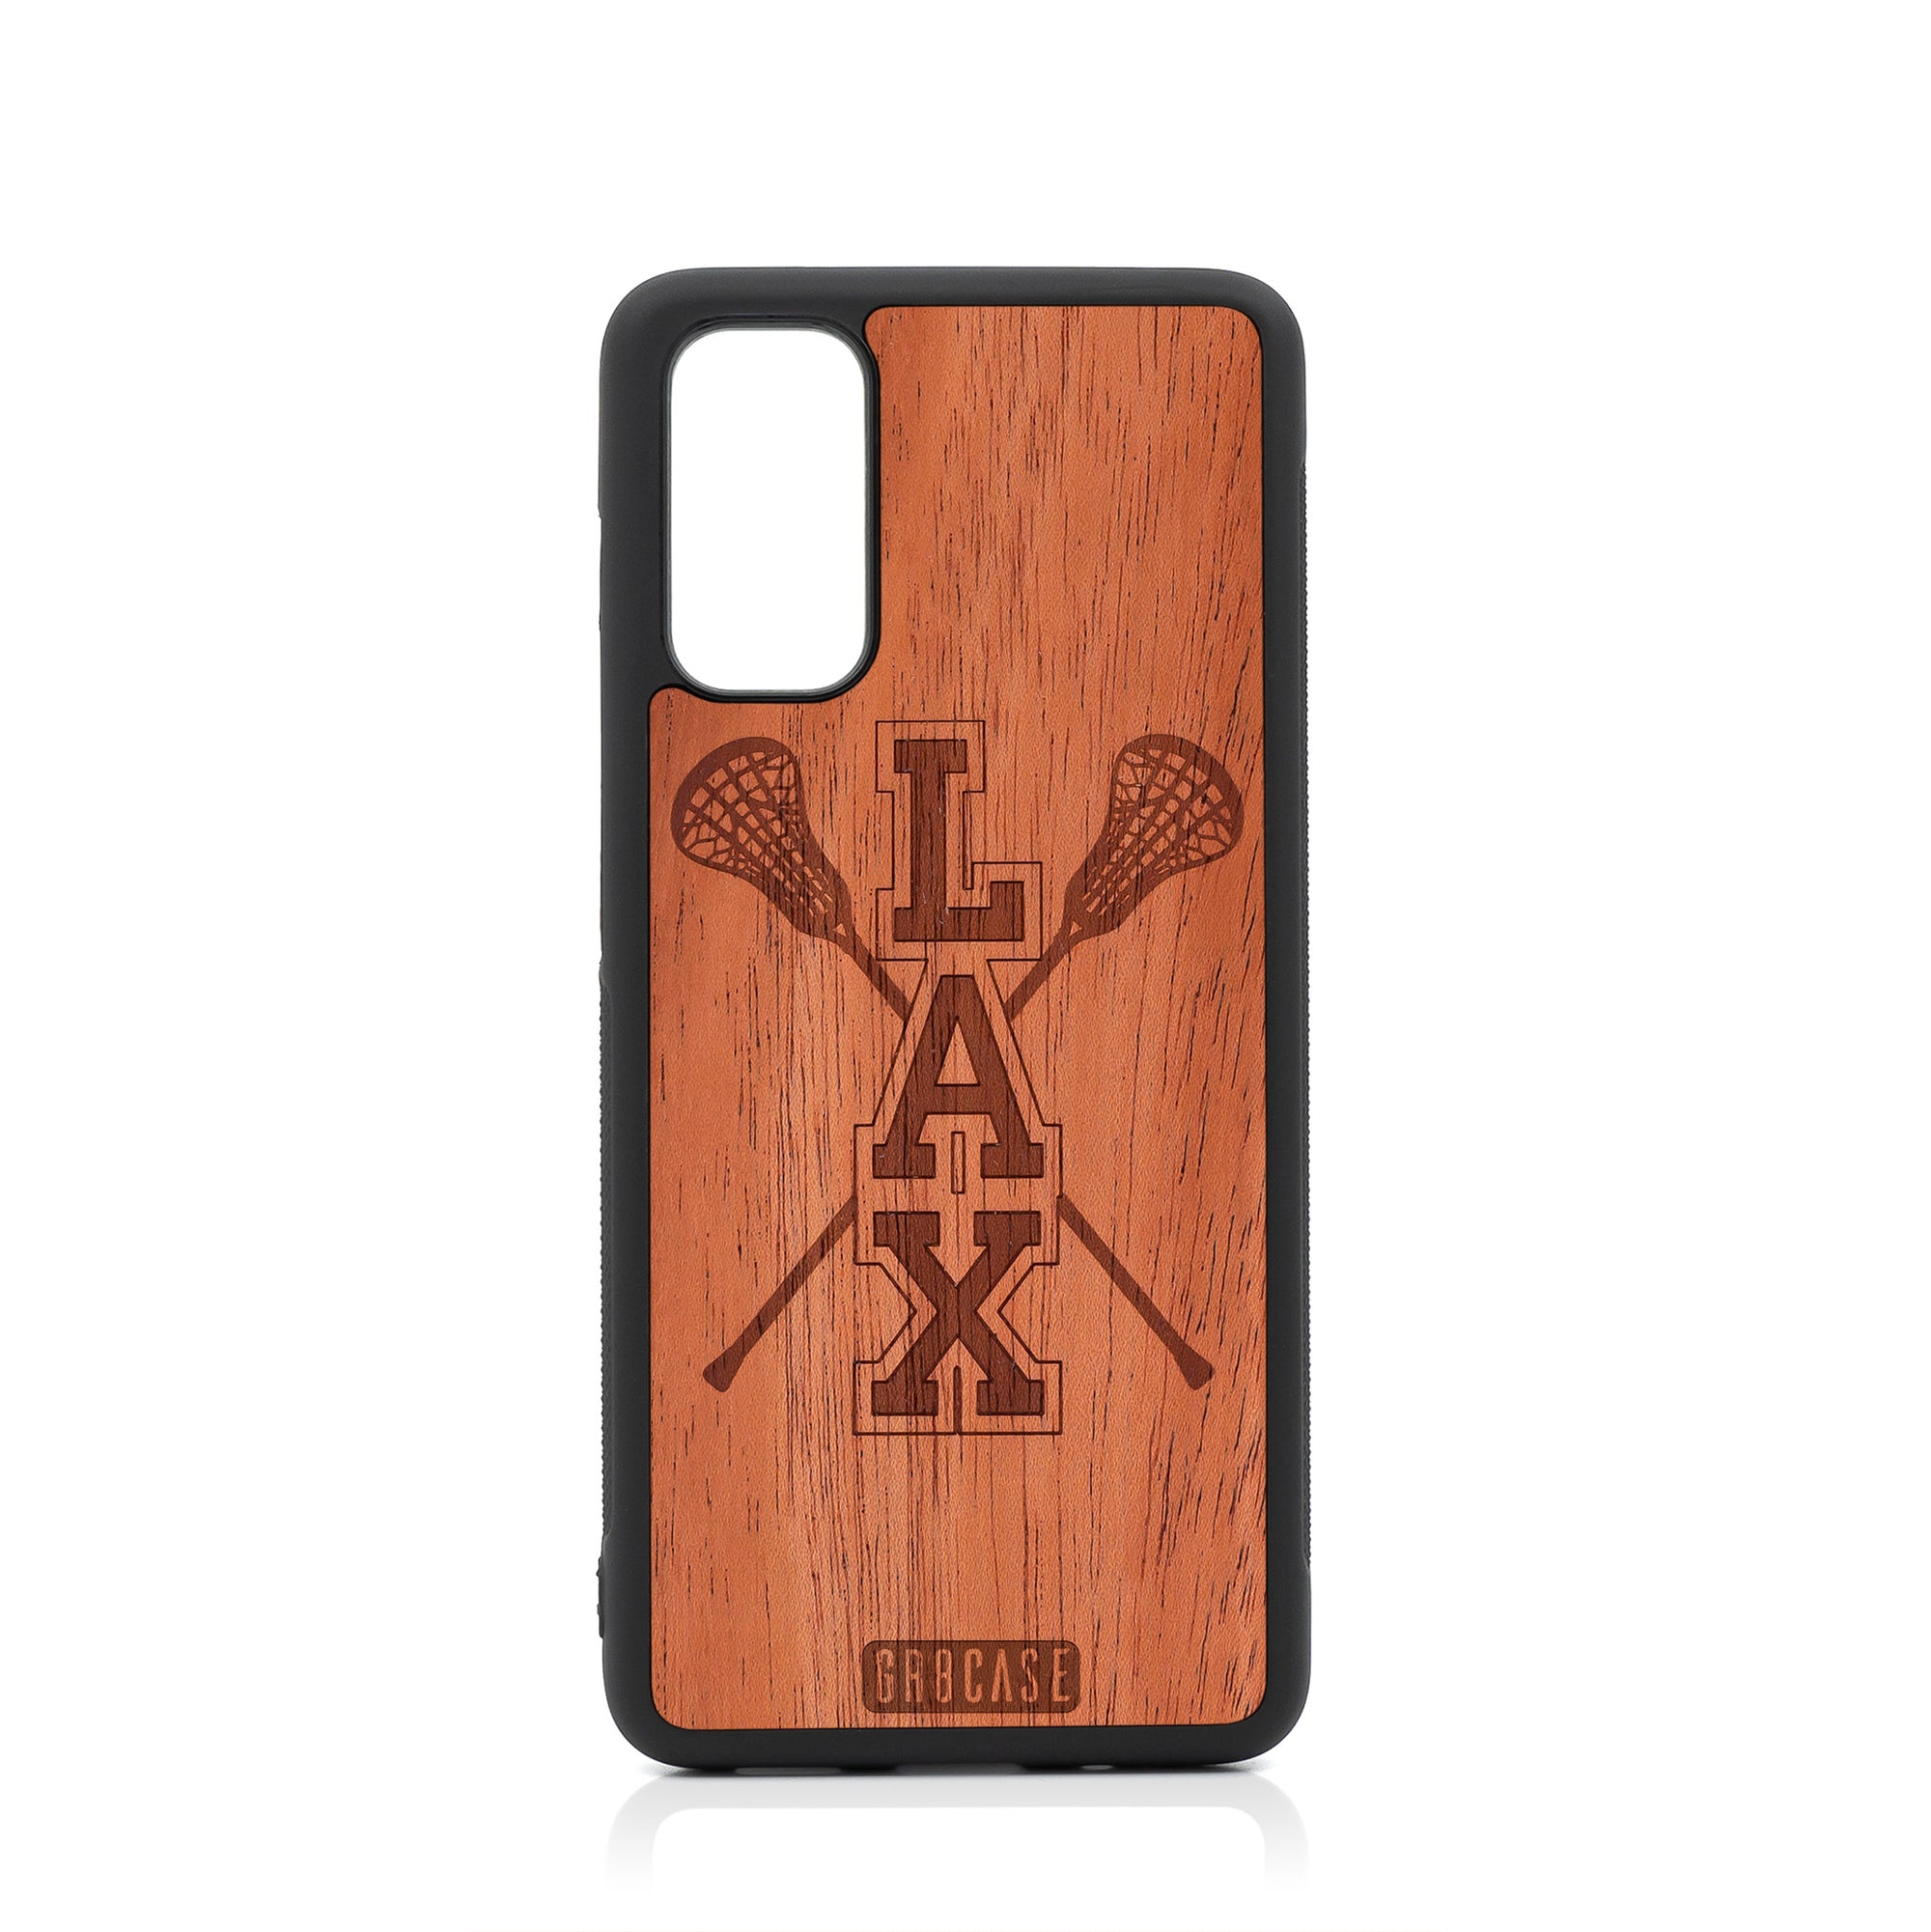 Lax Design Wood Case For Samsung Galaxy S20 by GR8CASE